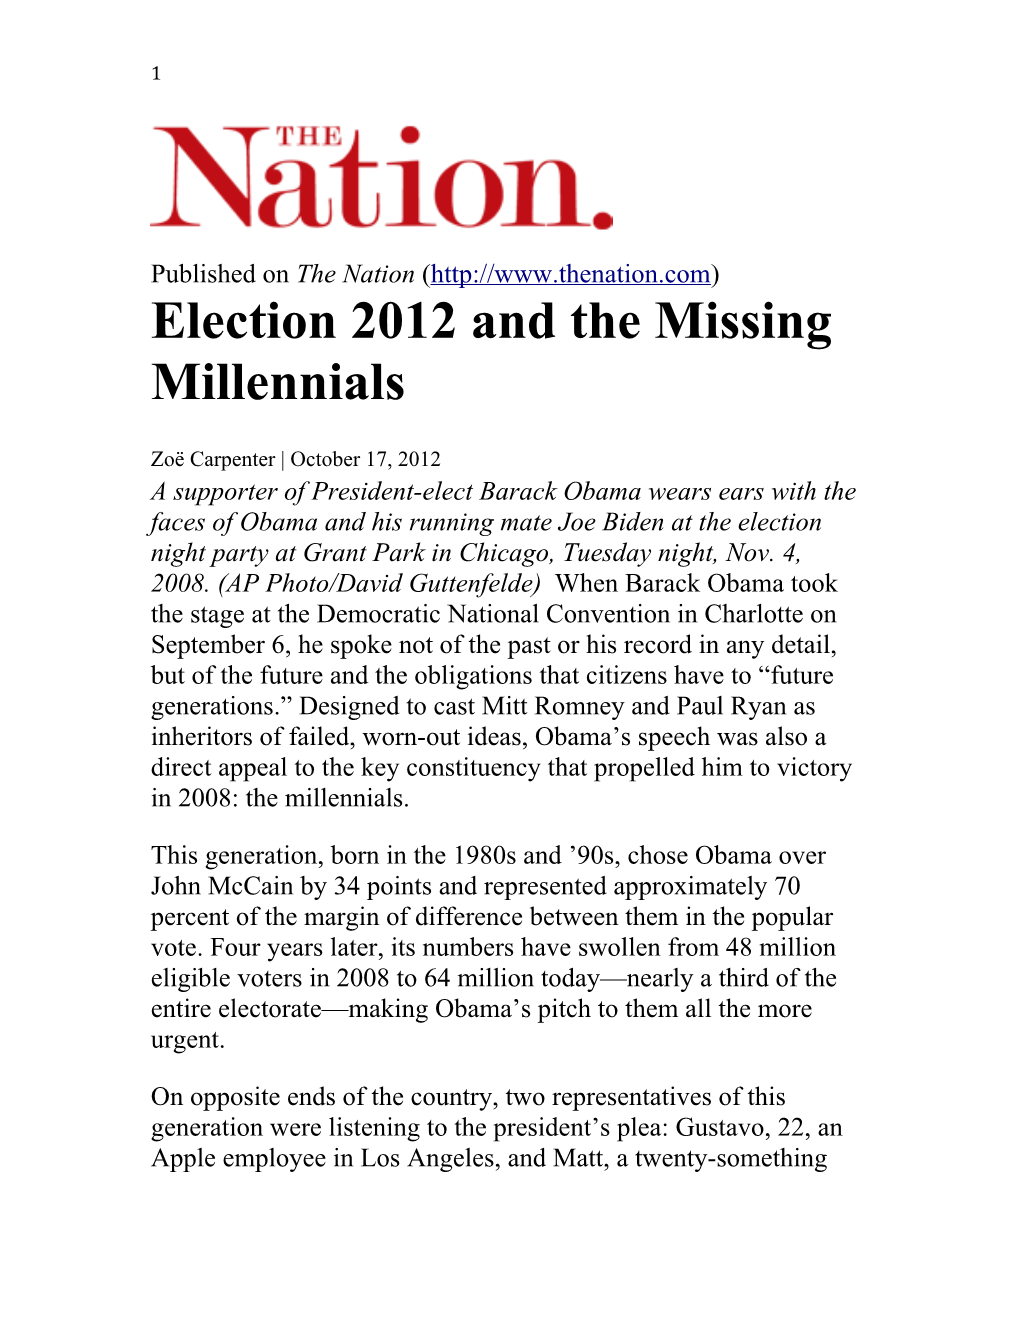 Election 2012 and the Missing Millennials